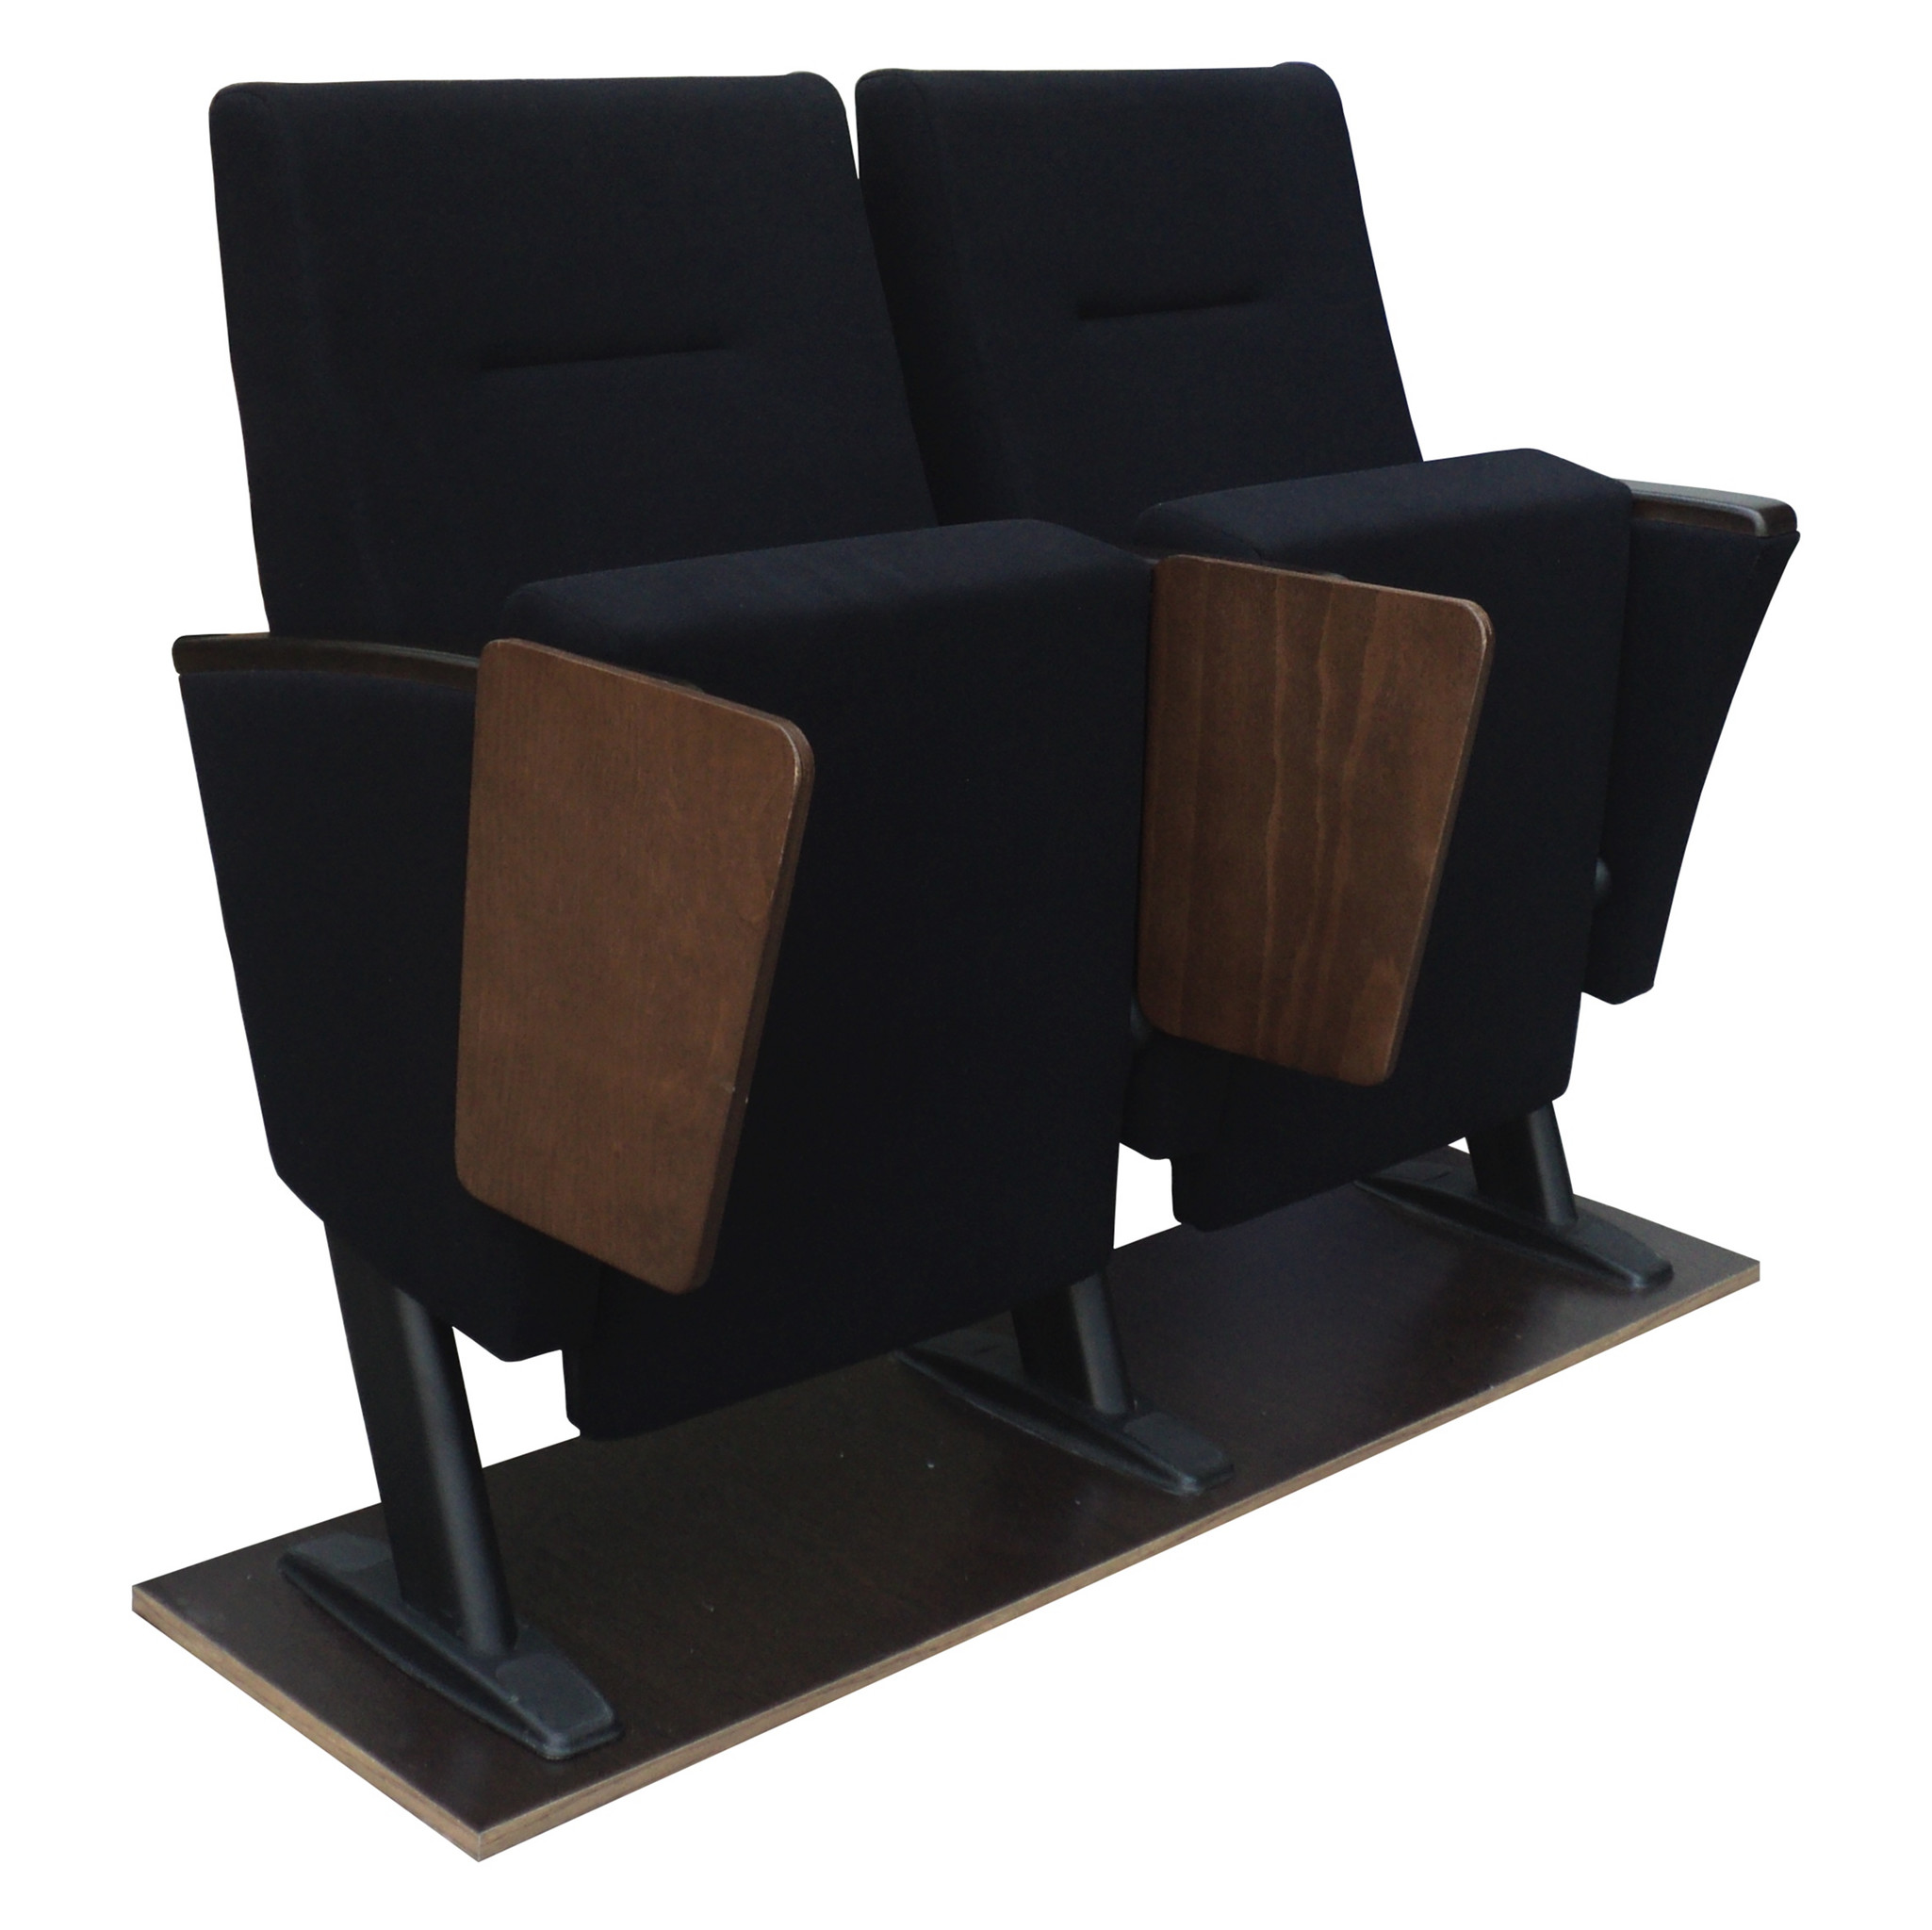 Akon Series - Y50-2 Model - Auditorium, Theater Chair - Dimensions, Price